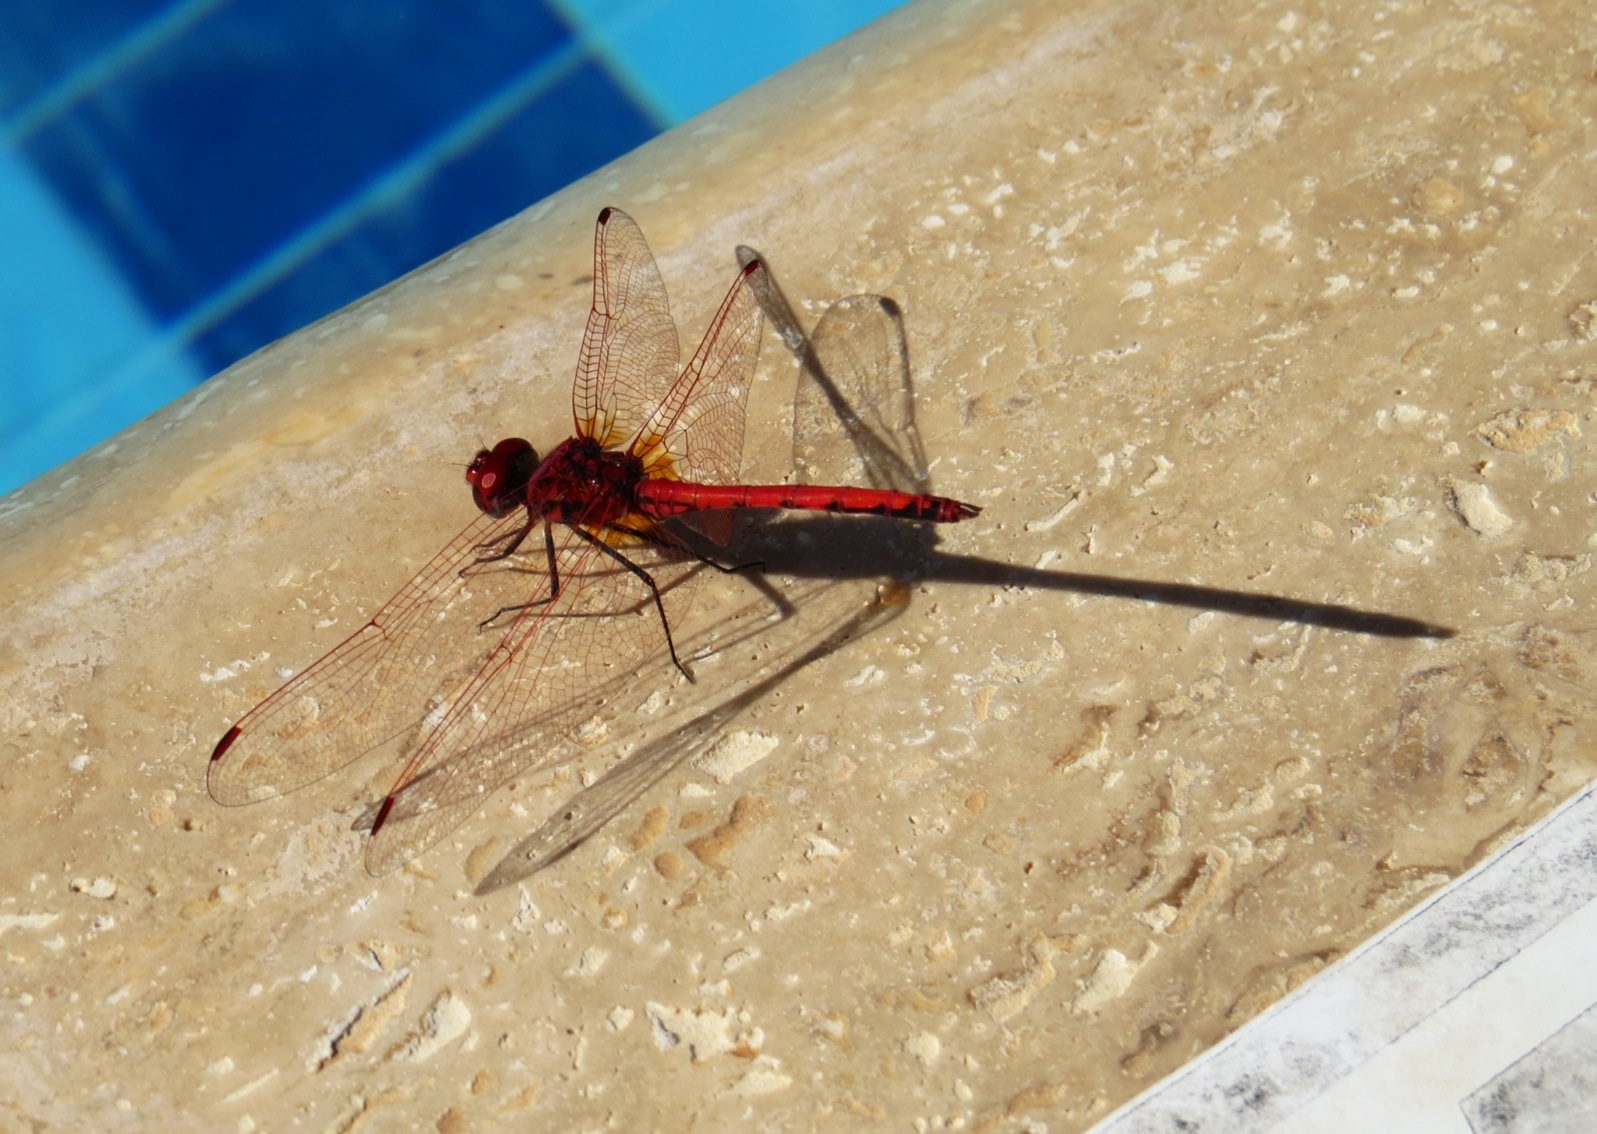 Dharma Dragonfly was pleased with how long his body looked when he glanced at his shadow!